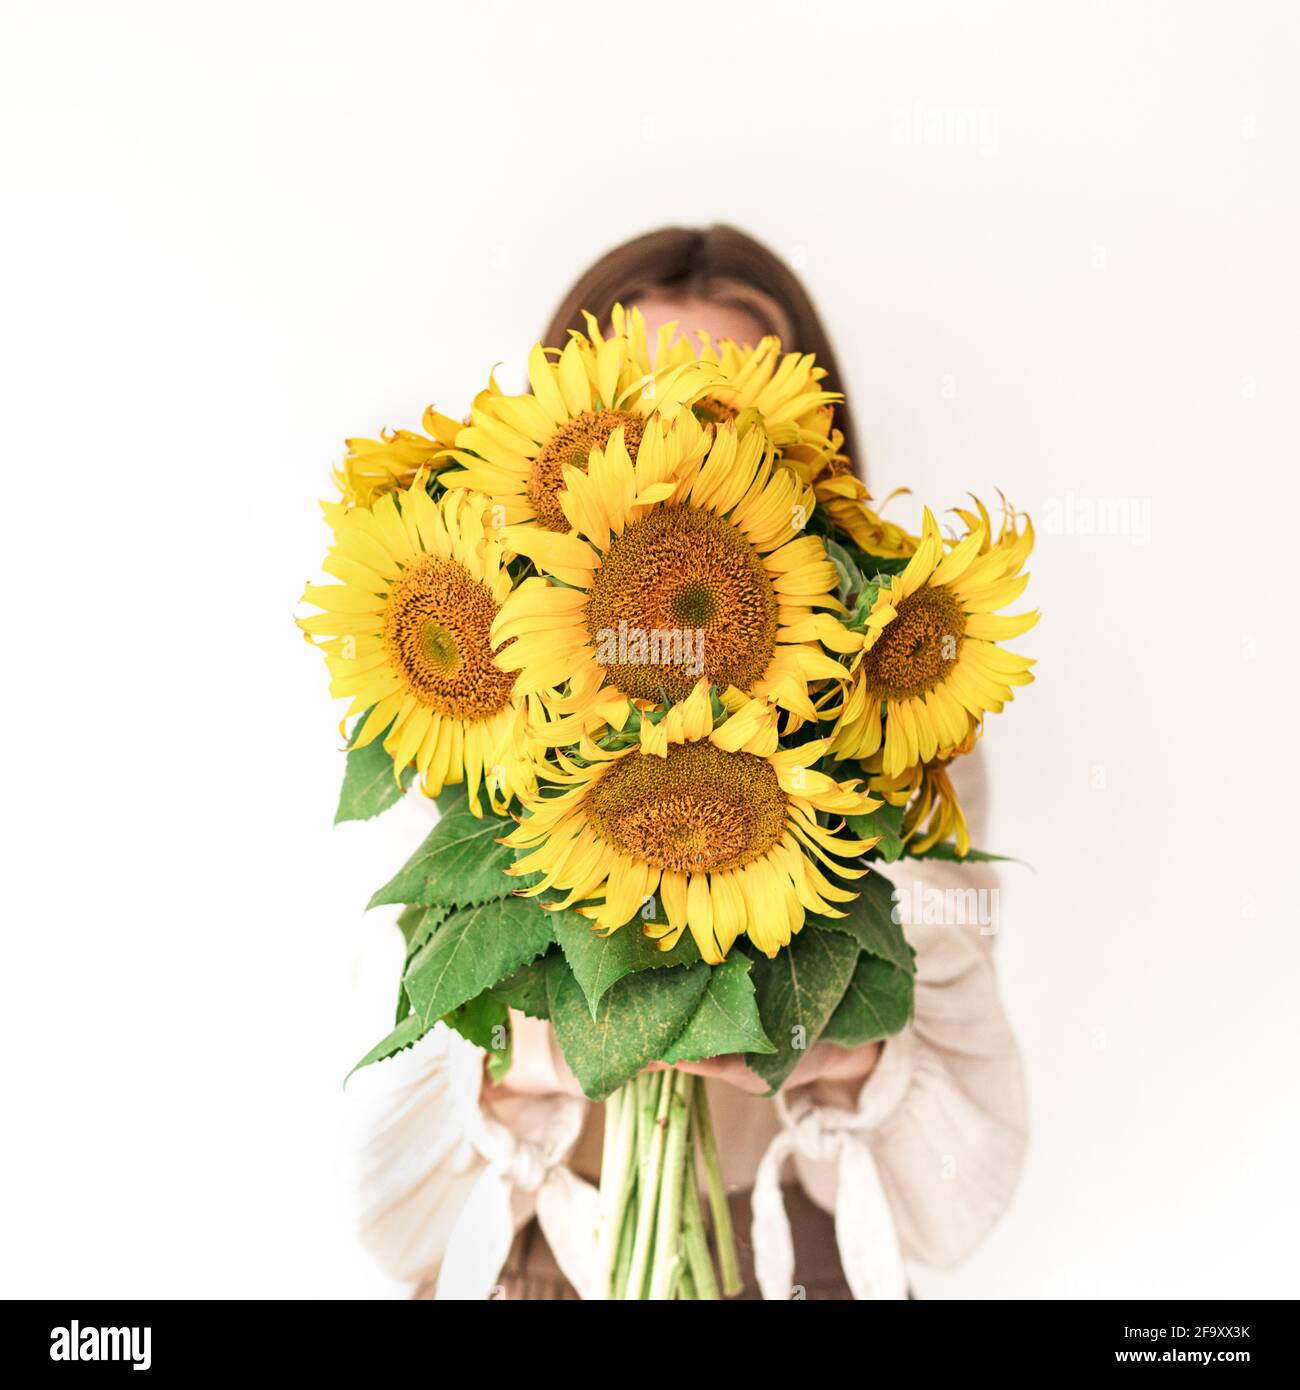 Beautiful young woman in linen dress holding sunflowers bouquet on white background. Autumn concept. Stock Photo